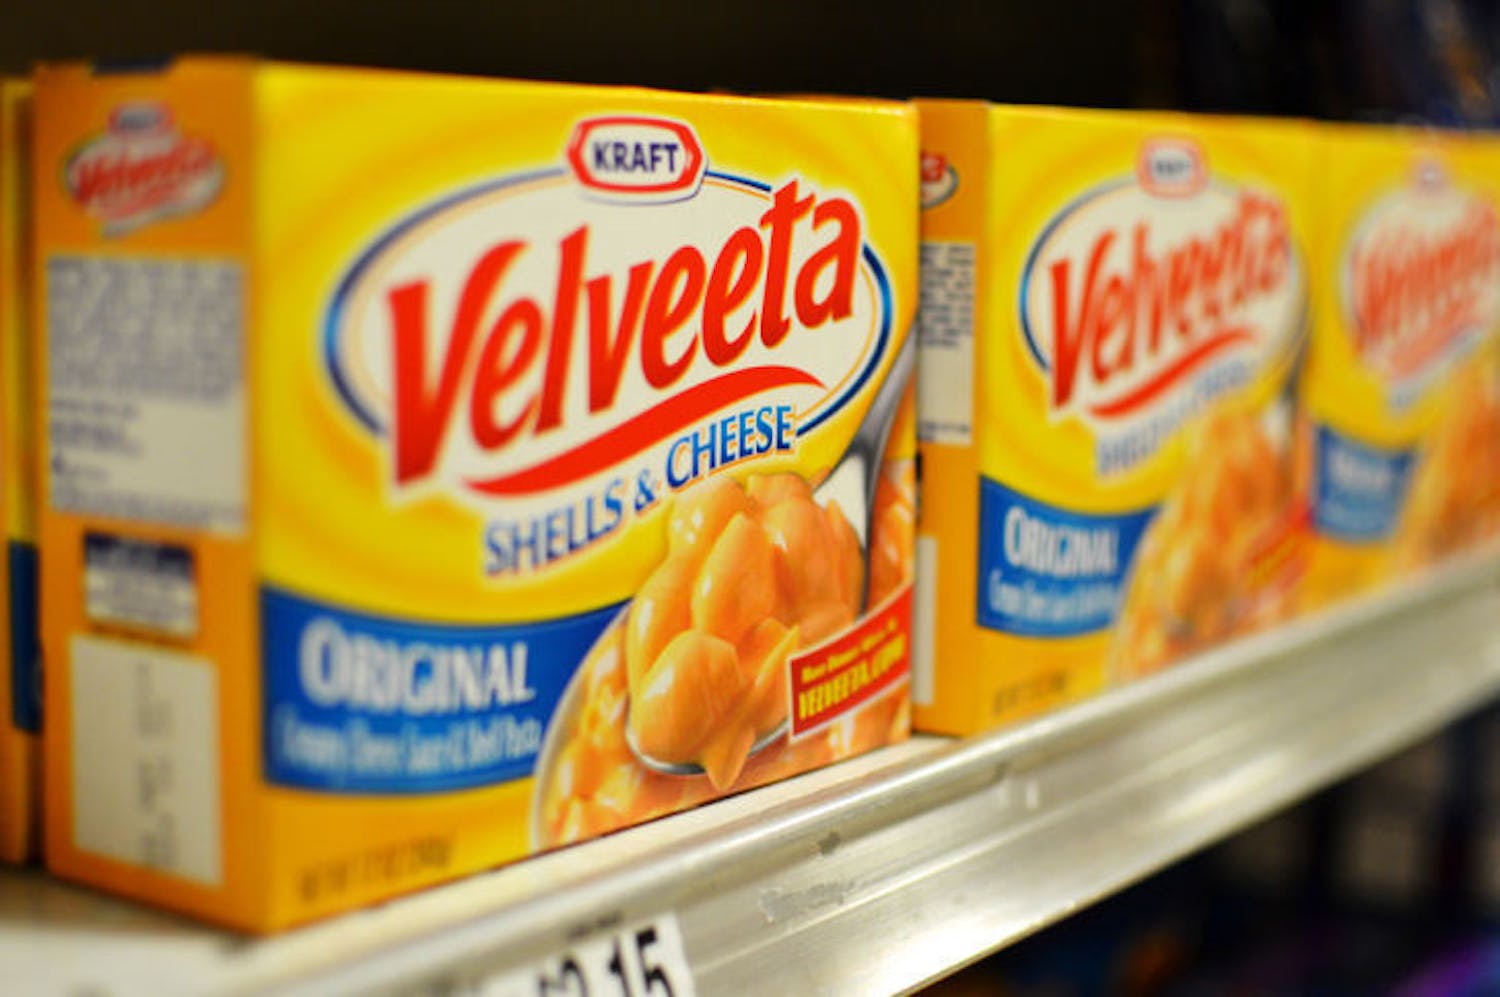 Velveeta macaroni and cheese boxes line Publix shelves on Archer Road Monday afternoon.Internet users dubbed a current shortage of Velveeta cheese products a #cheesepocalypse.&nbsp;